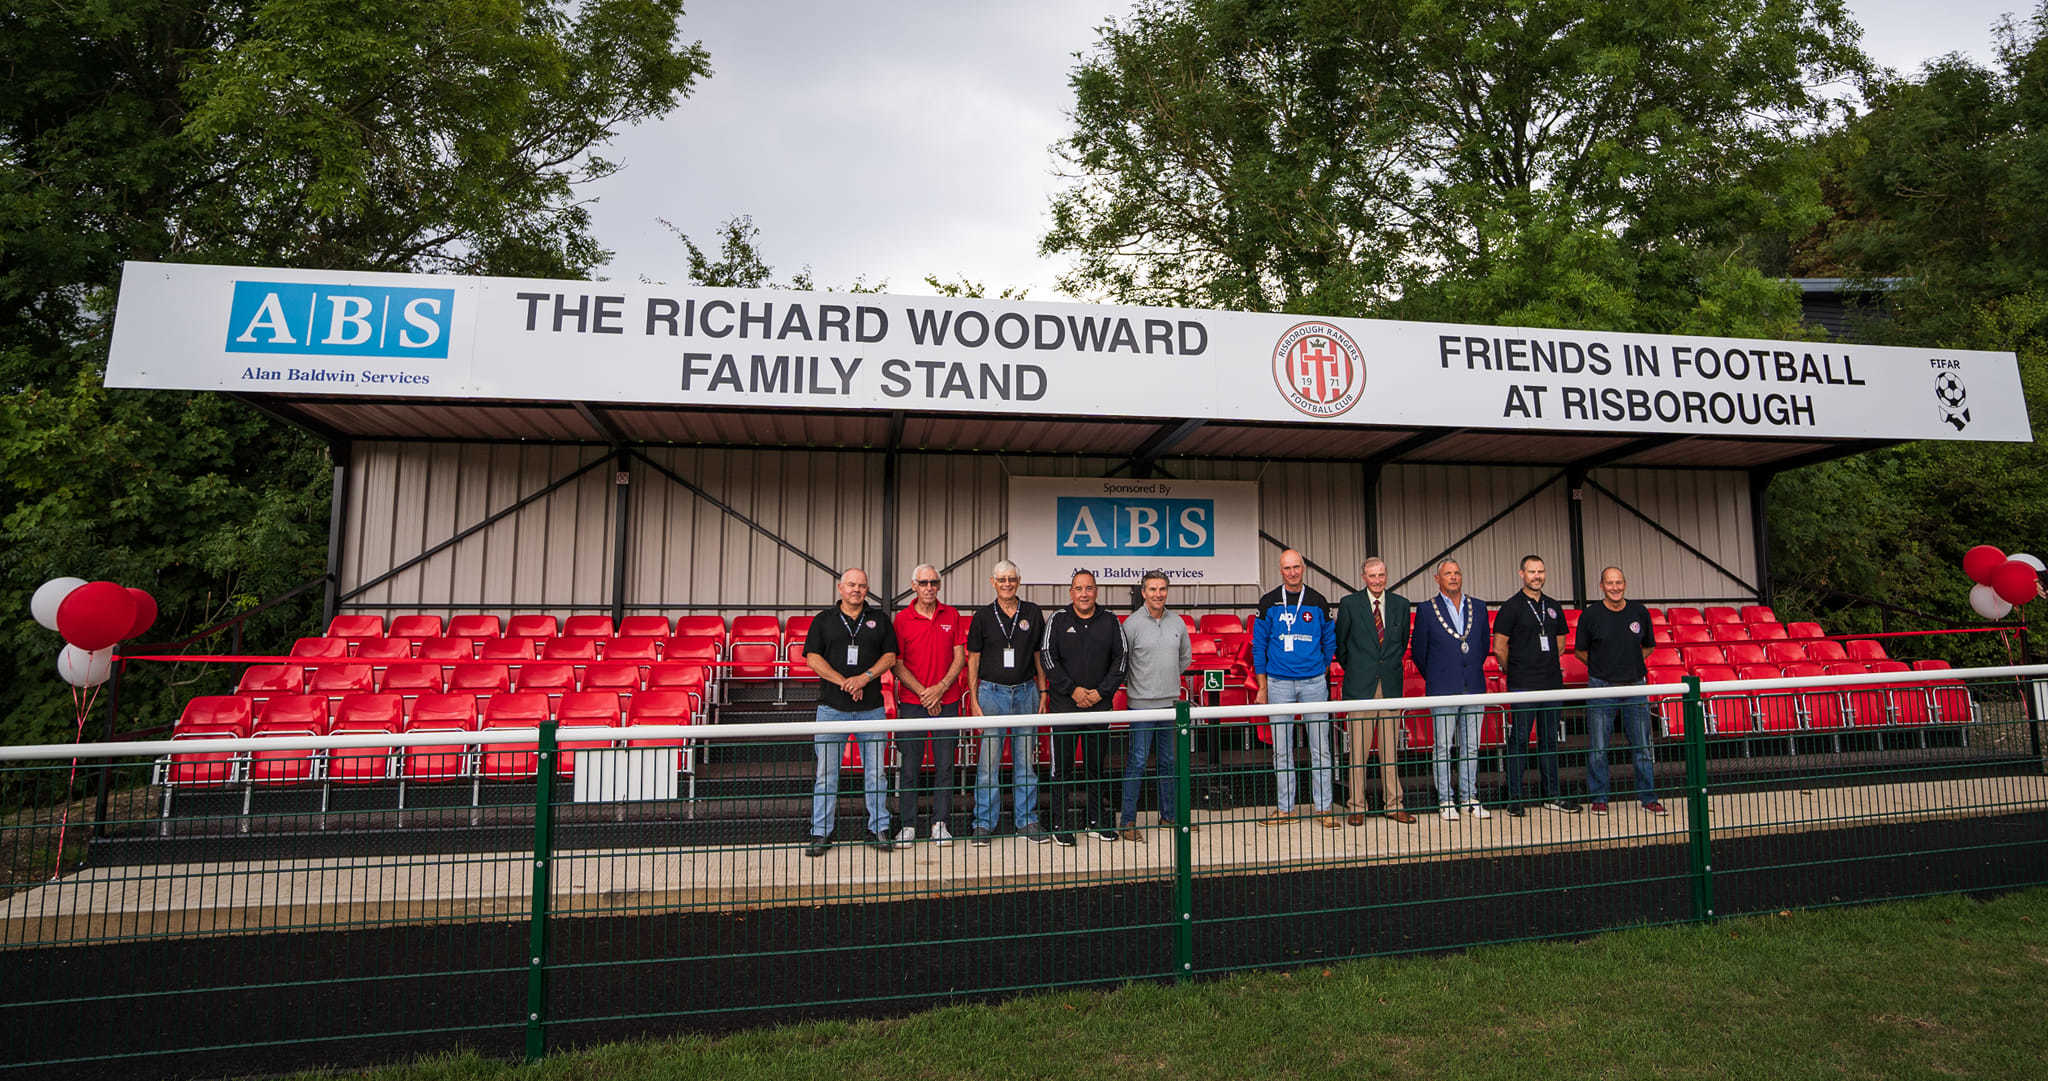 The Richard Woodwar Family Stand is named after the clubs chairman